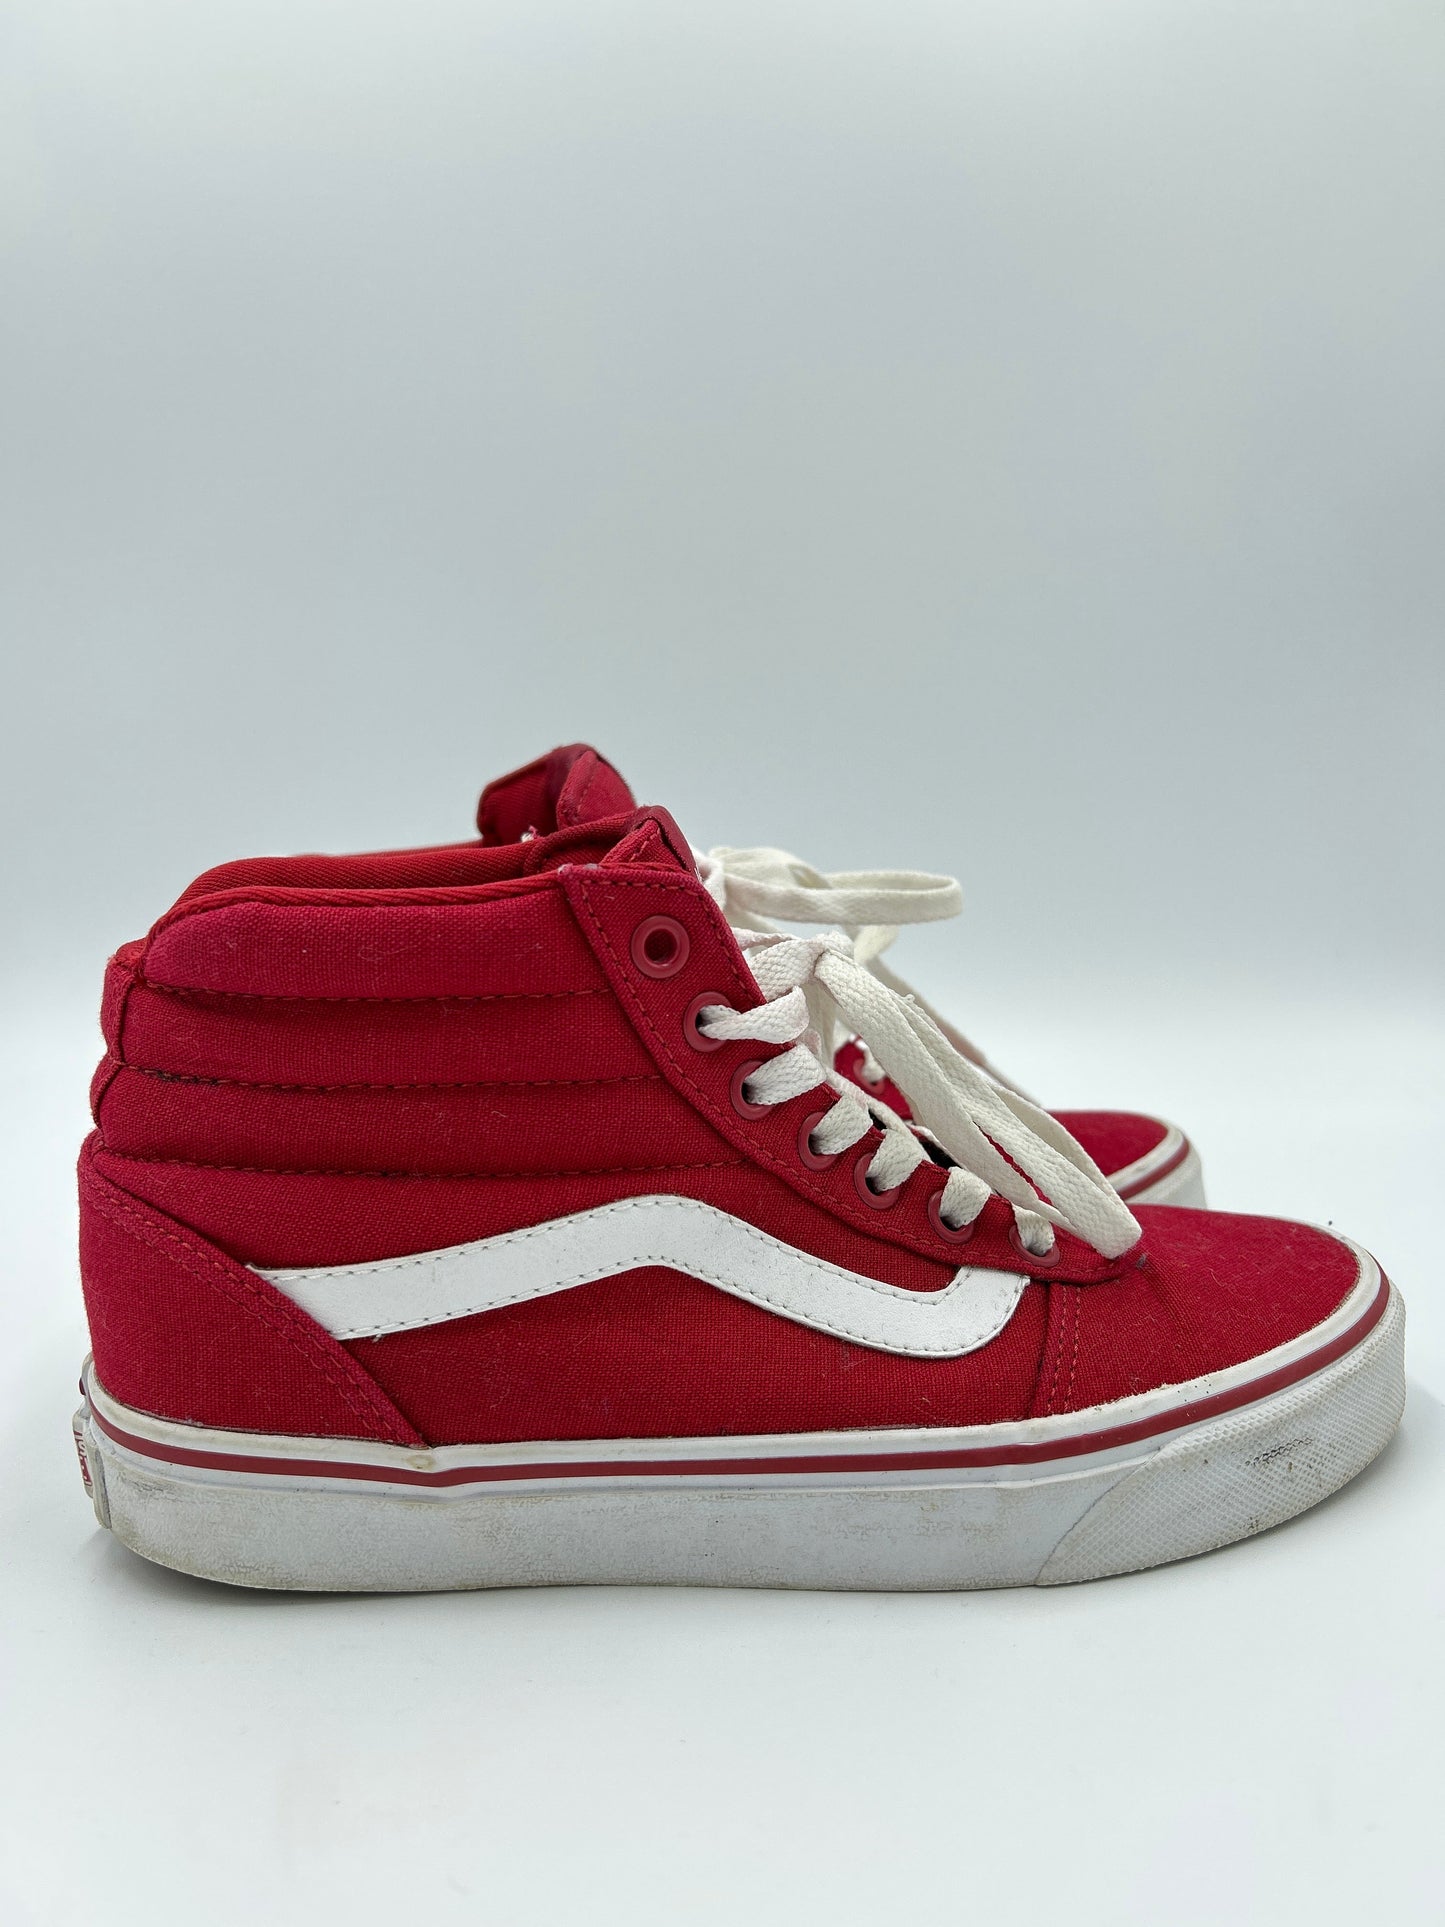 Shoes Sneakers By Vans  Size: 6